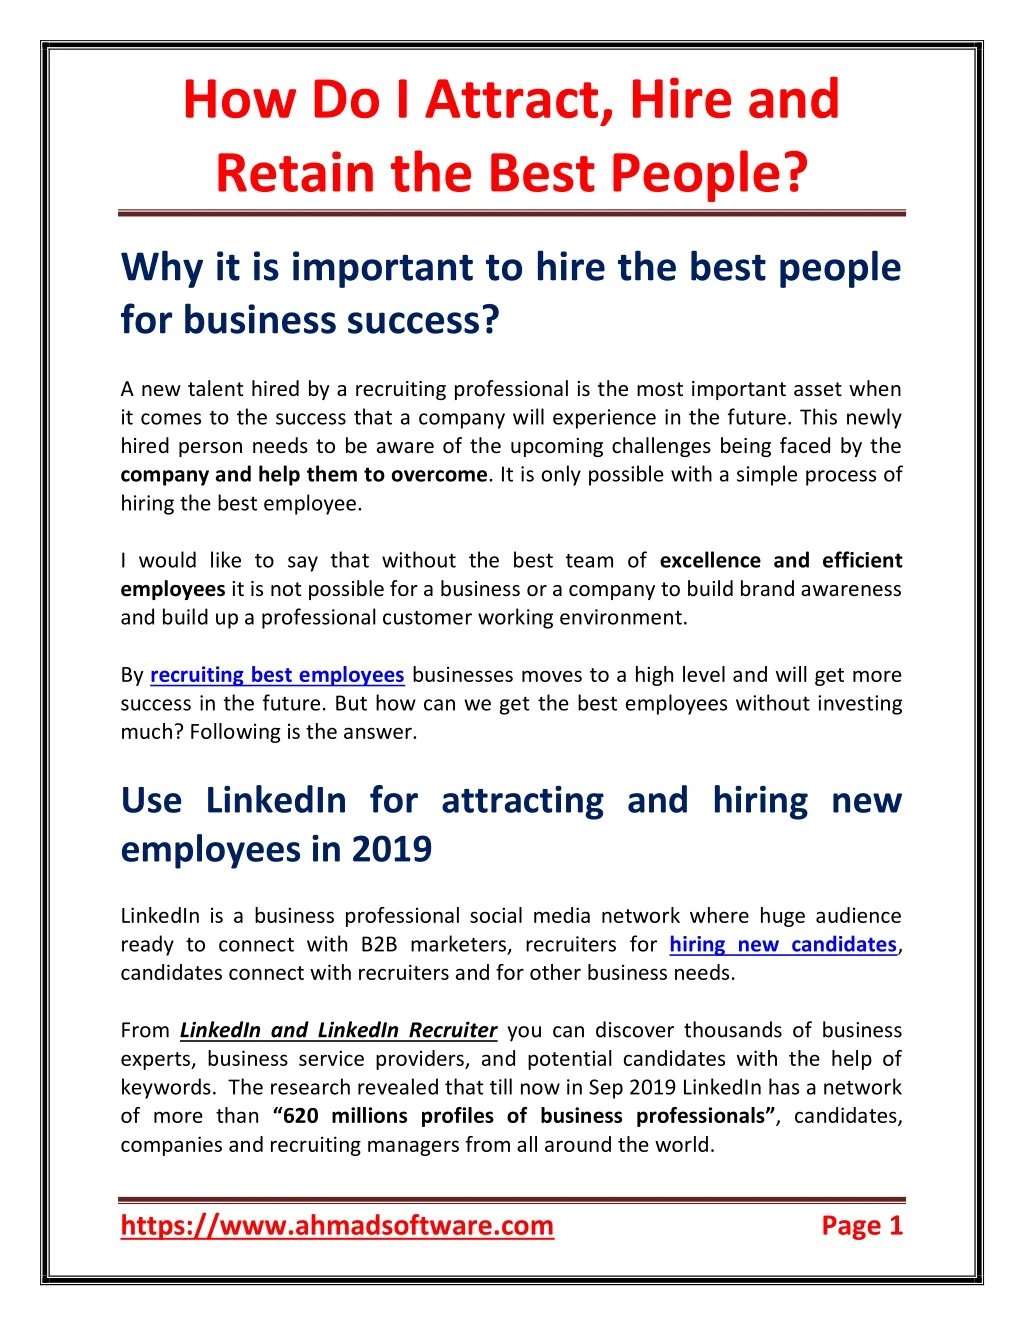 how do i attract hire and retain the best people